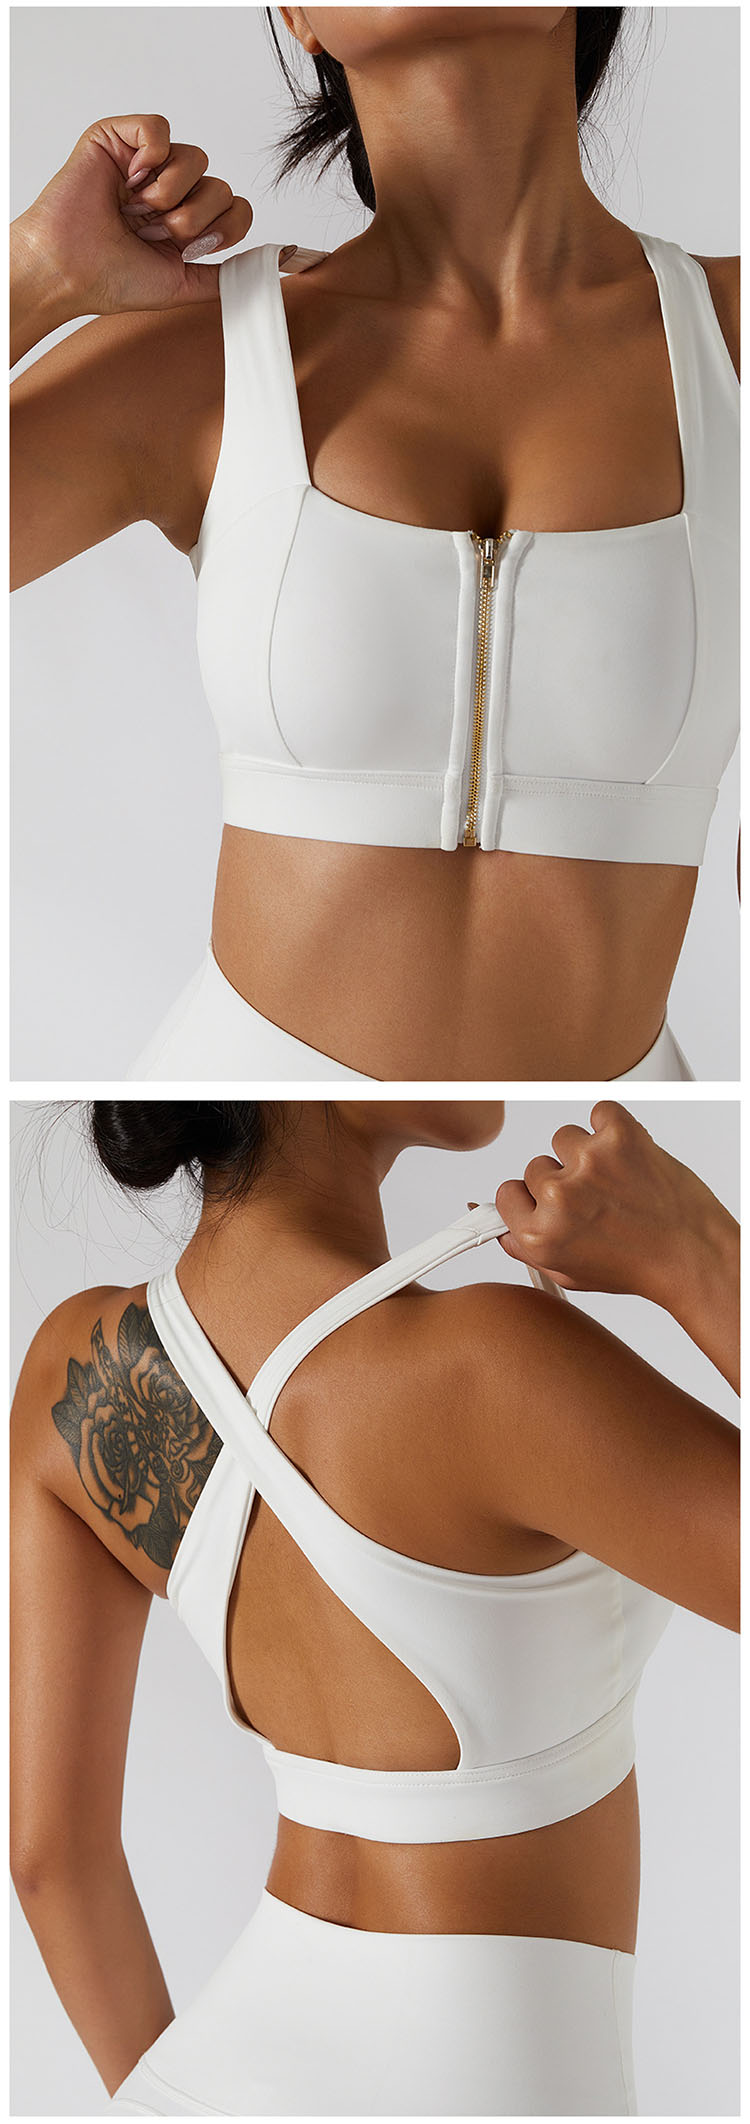 The crossed shoulder straps on the back are hollowed out and thin, breathable and comfortable.